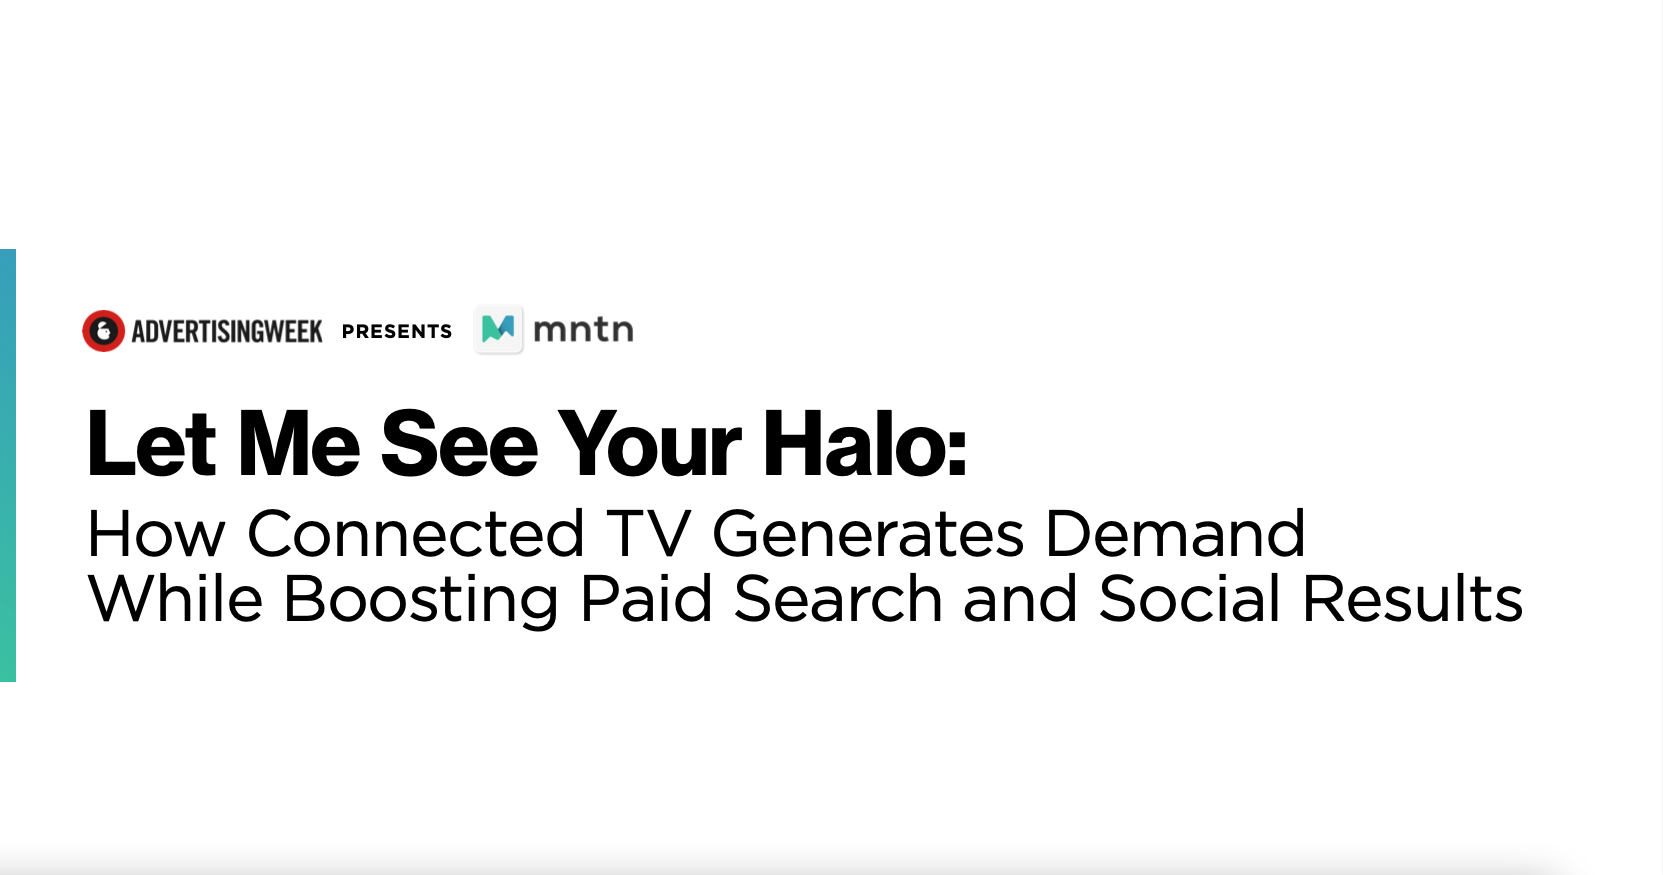 Let Me See Your Halo: How Connected TV Generates Demand While Boosting Paid Search and Social Results